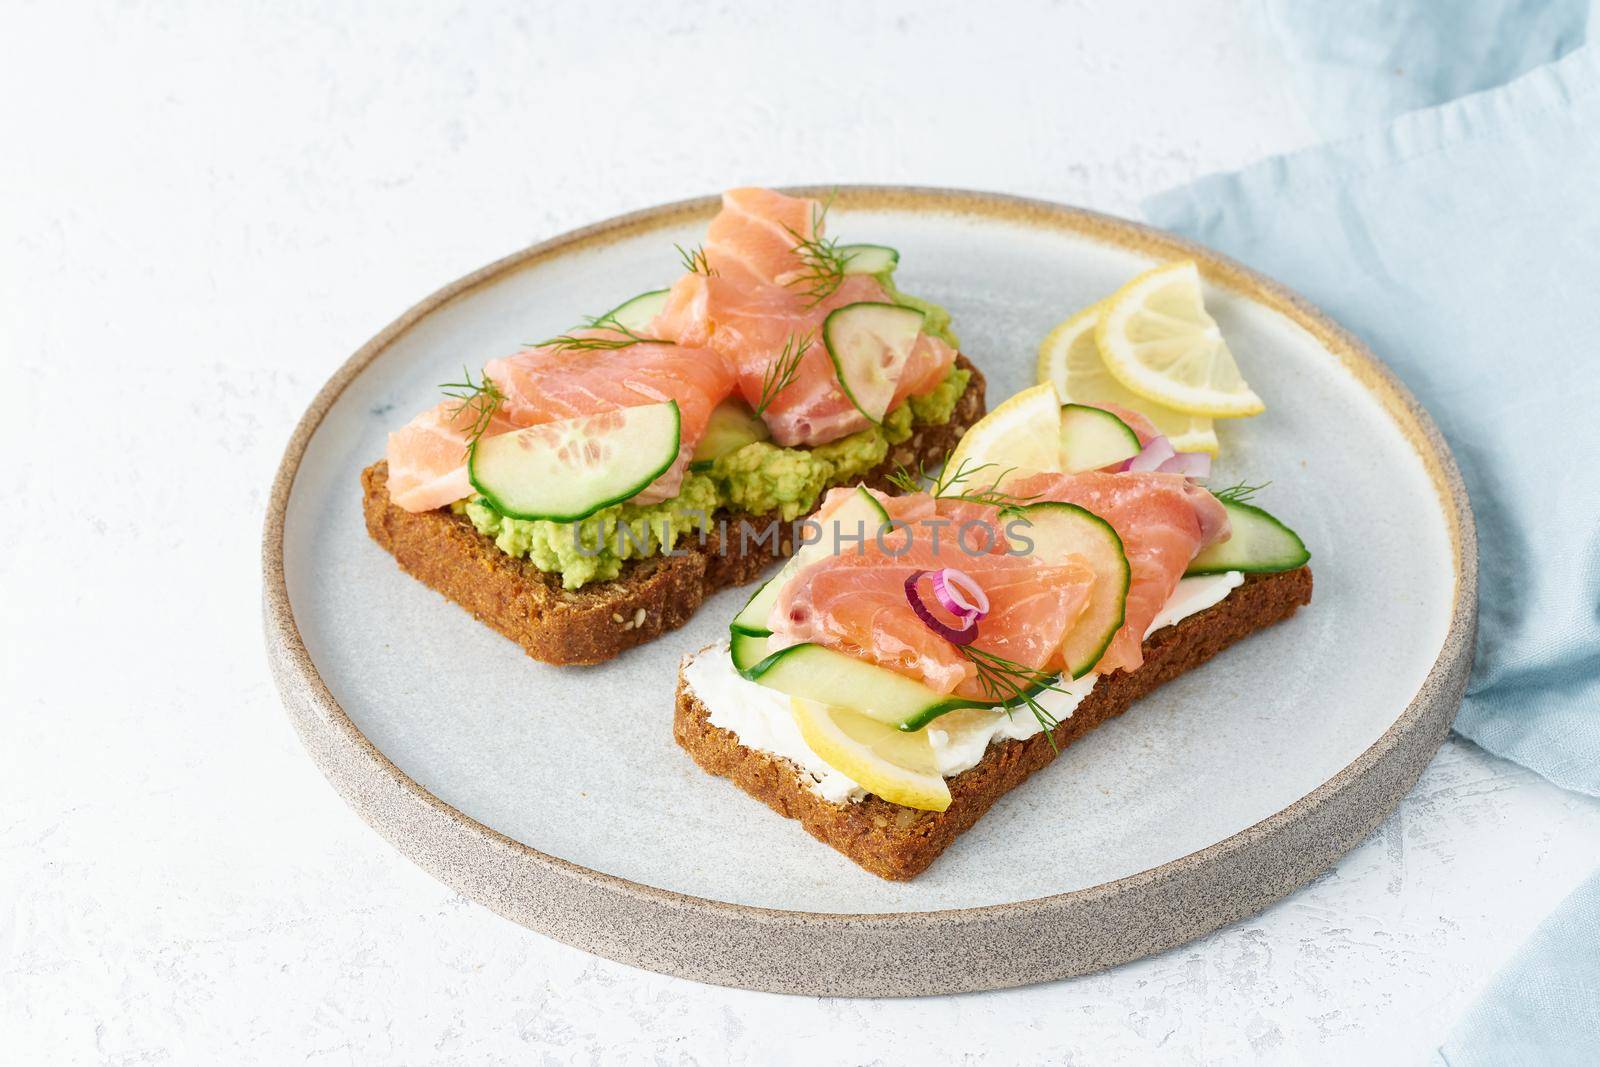 Smorrebrod - traditional Danish sandwiches. Black rye bread with salmon, cream cheese, cucumber, avocado on a wooden background